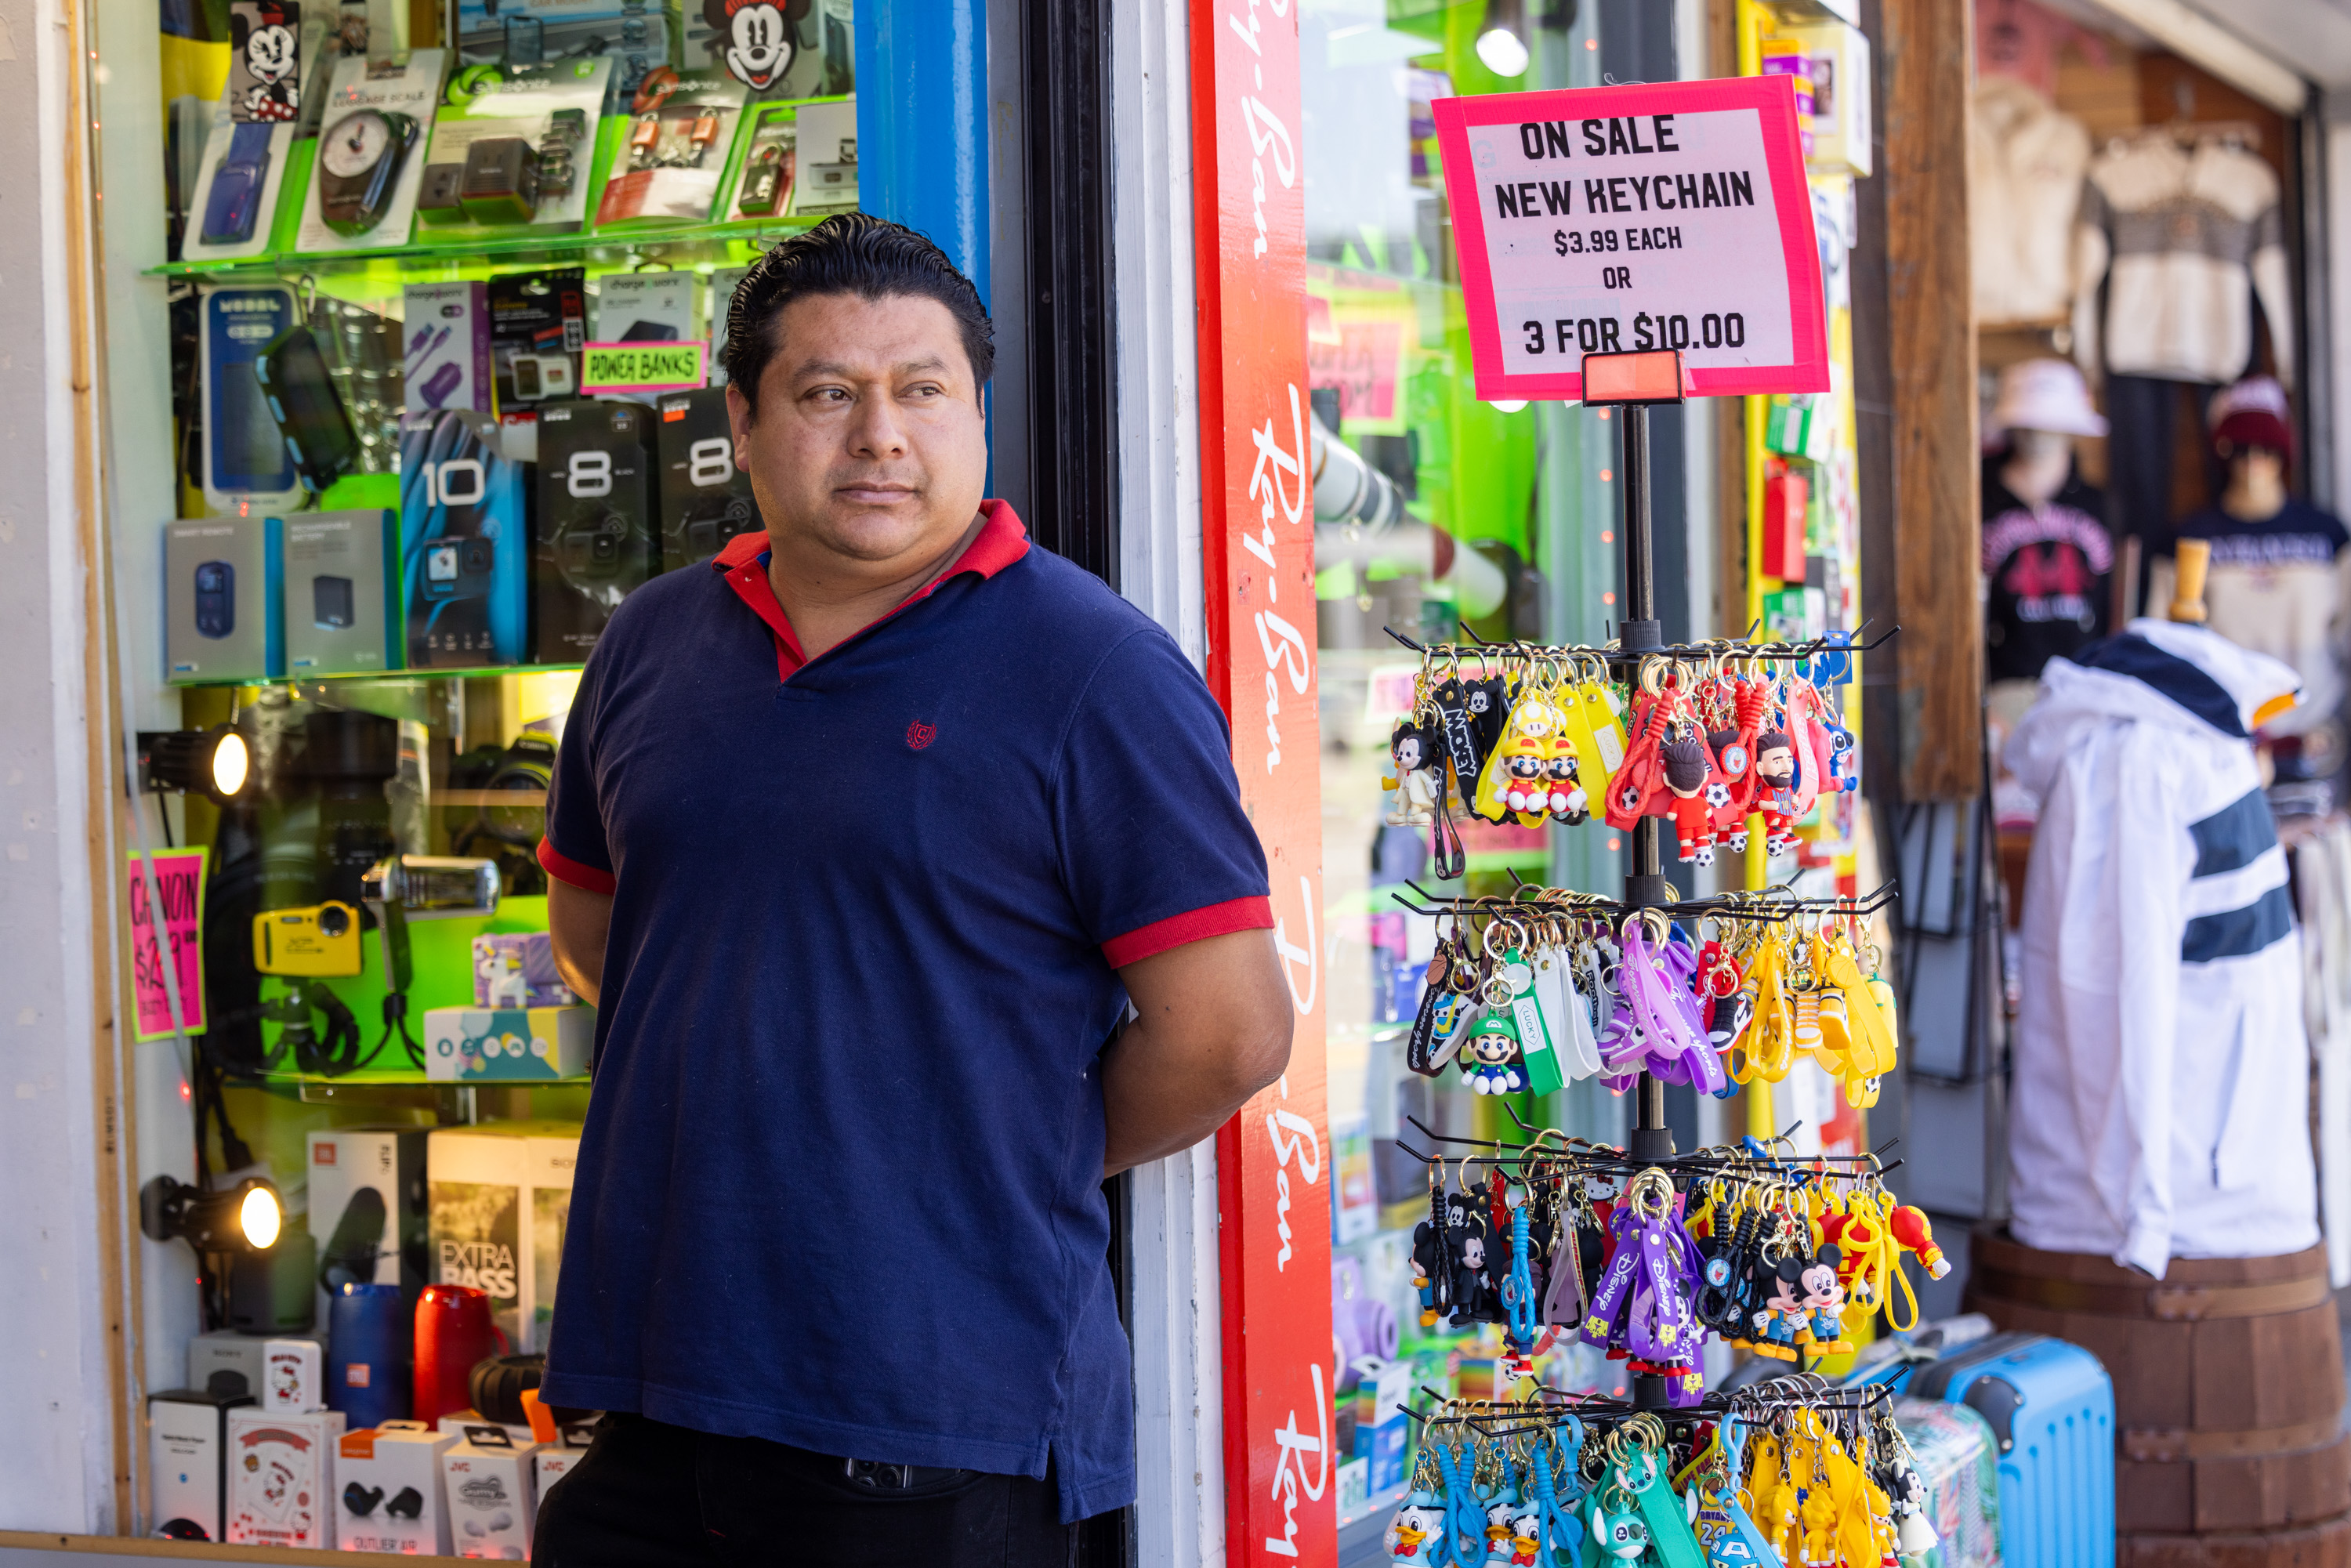 A man stands outside a shop filled with electronic gadgets and accessories, next to a display of colorful keychains with a sign reading "On Sale New Heychain $3.99 Each or 3 For $10.00."